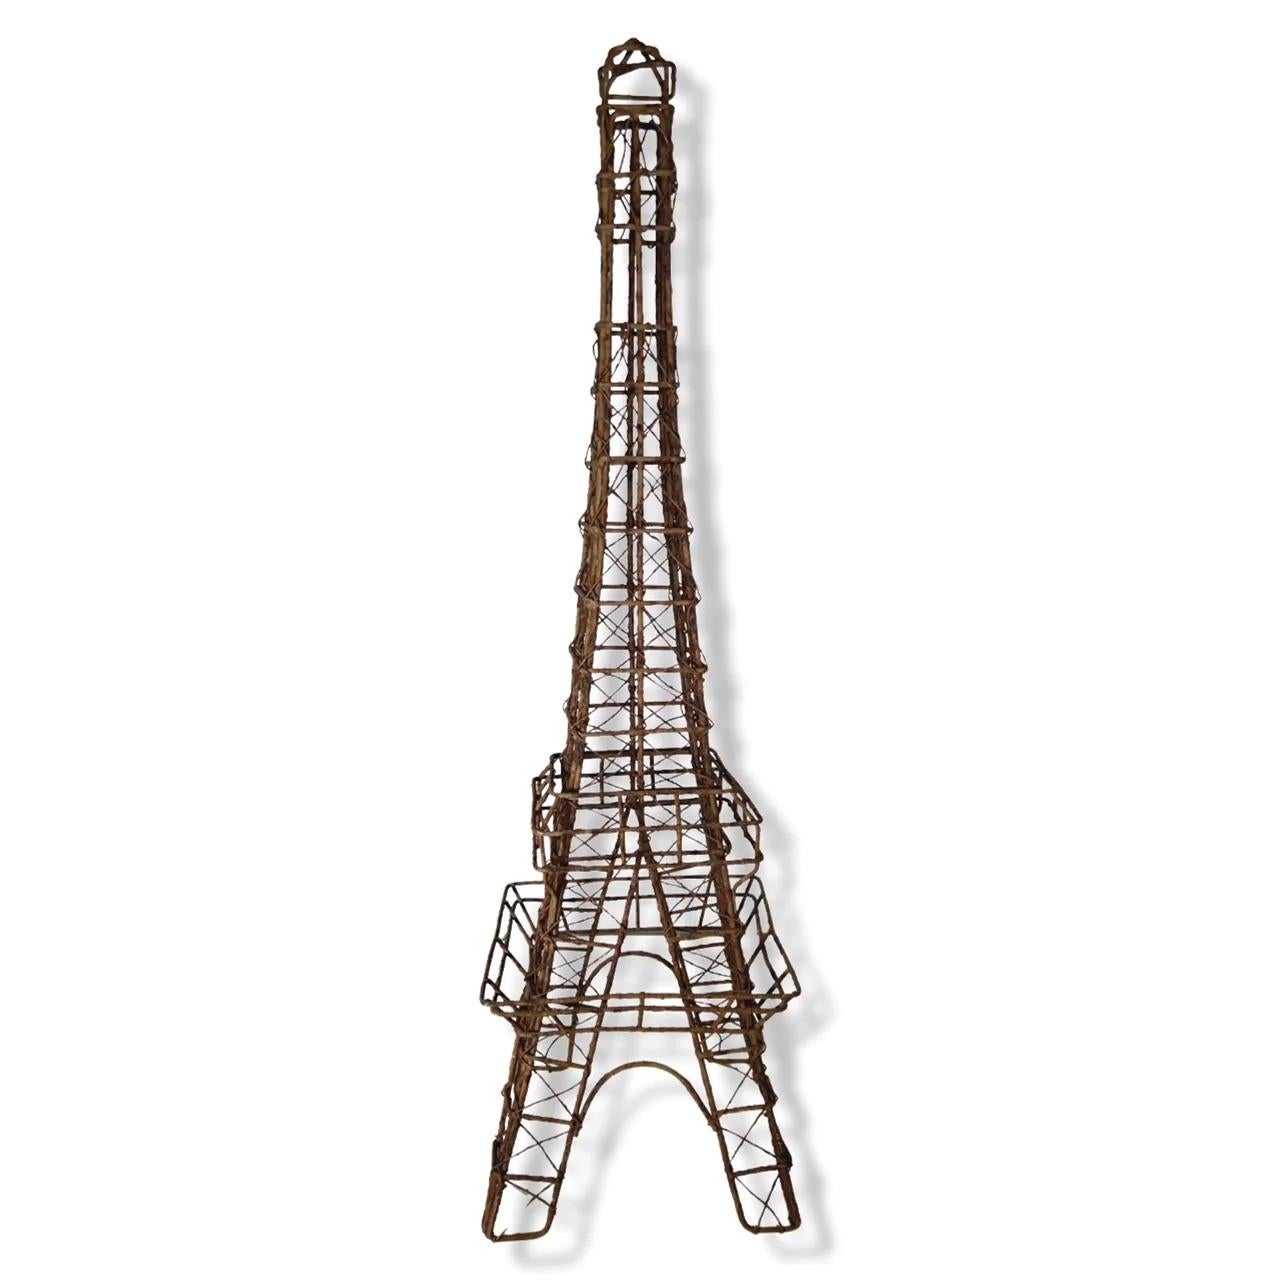 A lovely Tower Eiffel decorative piece, for Parisienne hearts all around the world. A perfect addition for ones garden, interior book shelf or even Province styled bathroom. Very tall and structurally in very good vintage condition, with a lovely